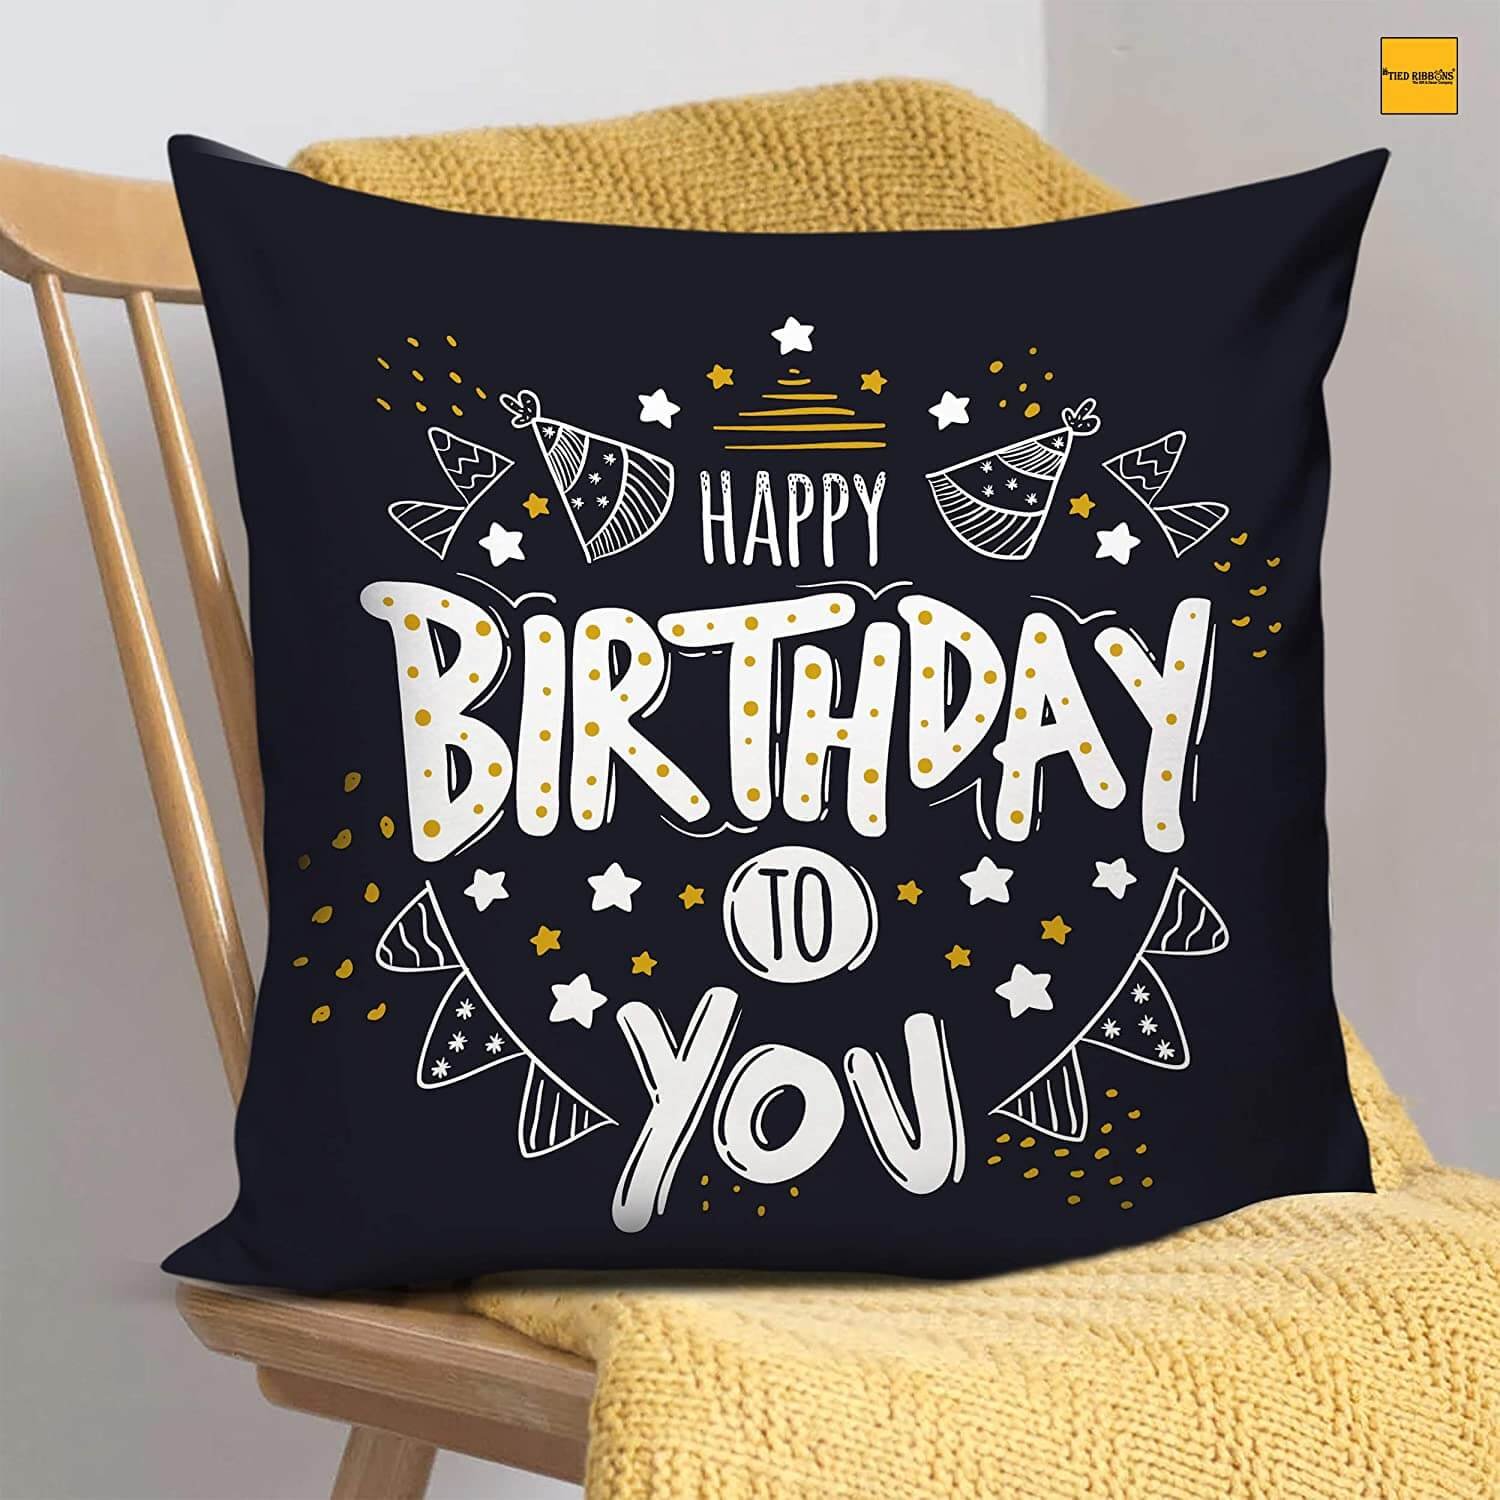 https://shoppingyatra.com/product_images/Tied Ribbons Cushion Cover With Filler And Coffee Mug3.jpg